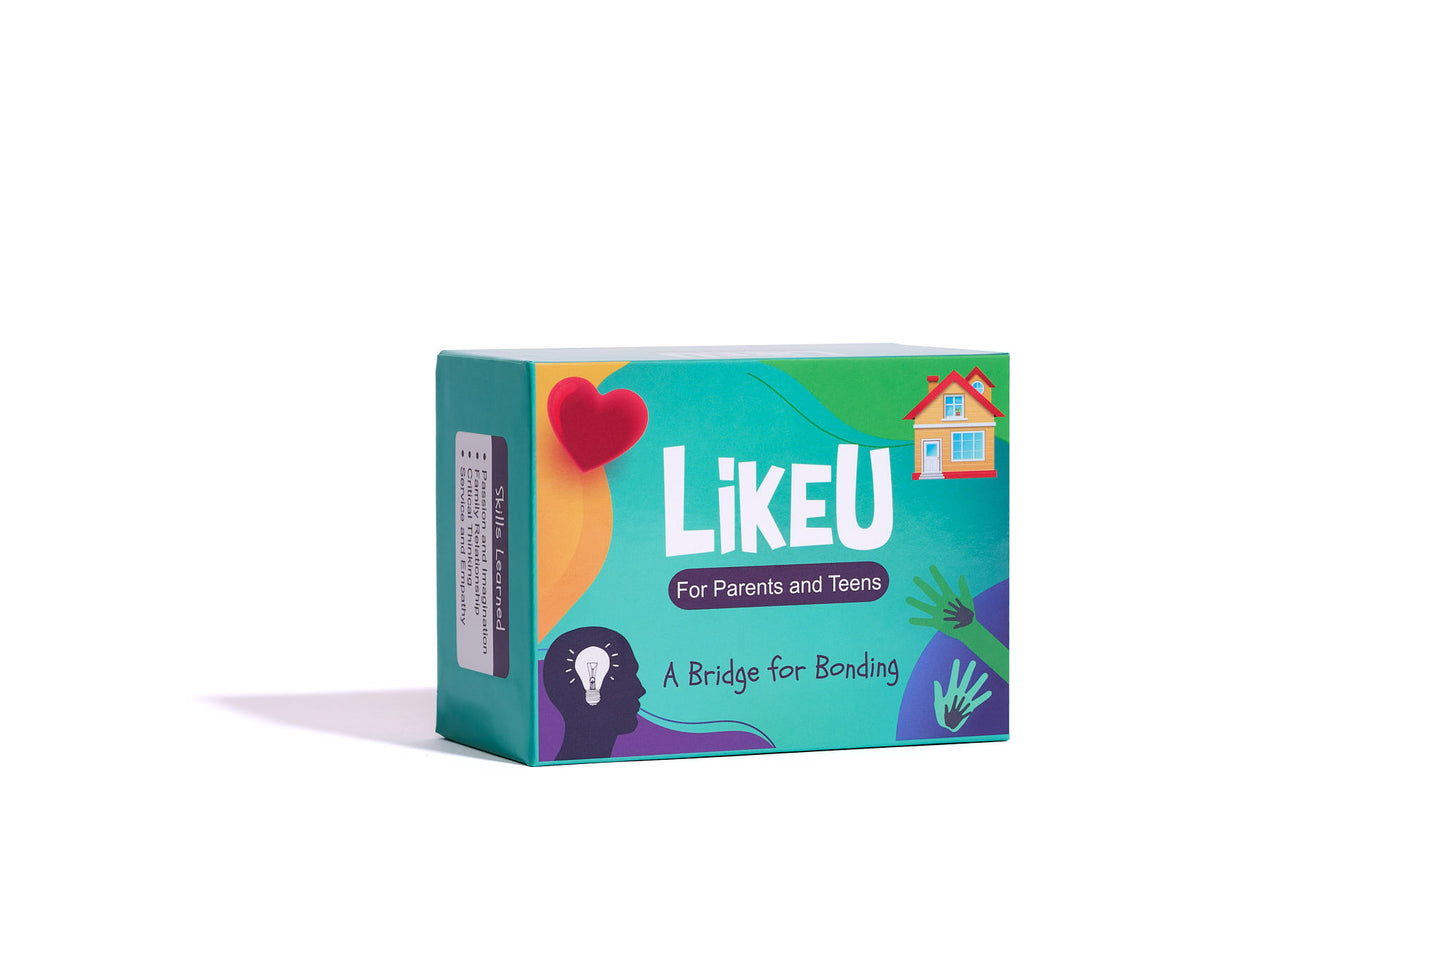 LikeU For Parents and Teens